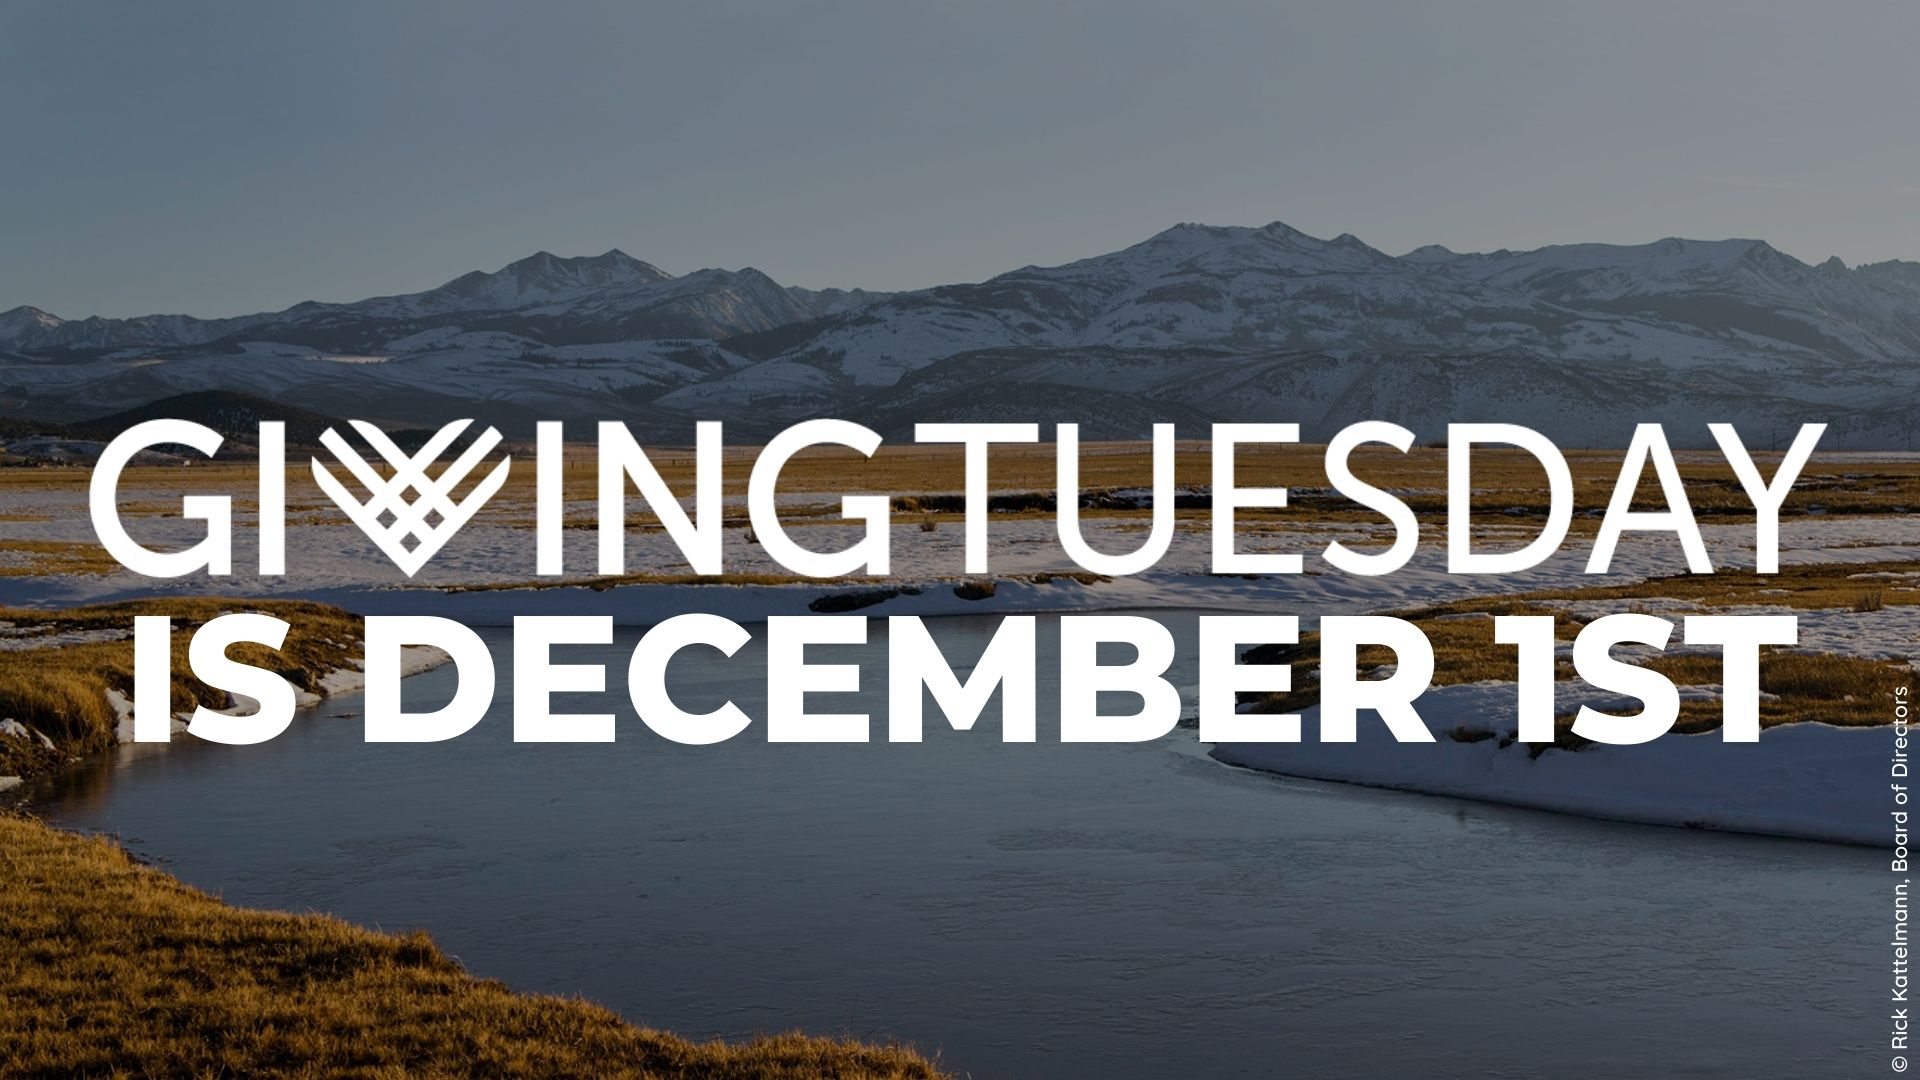 Giving Tuesday is December 1st